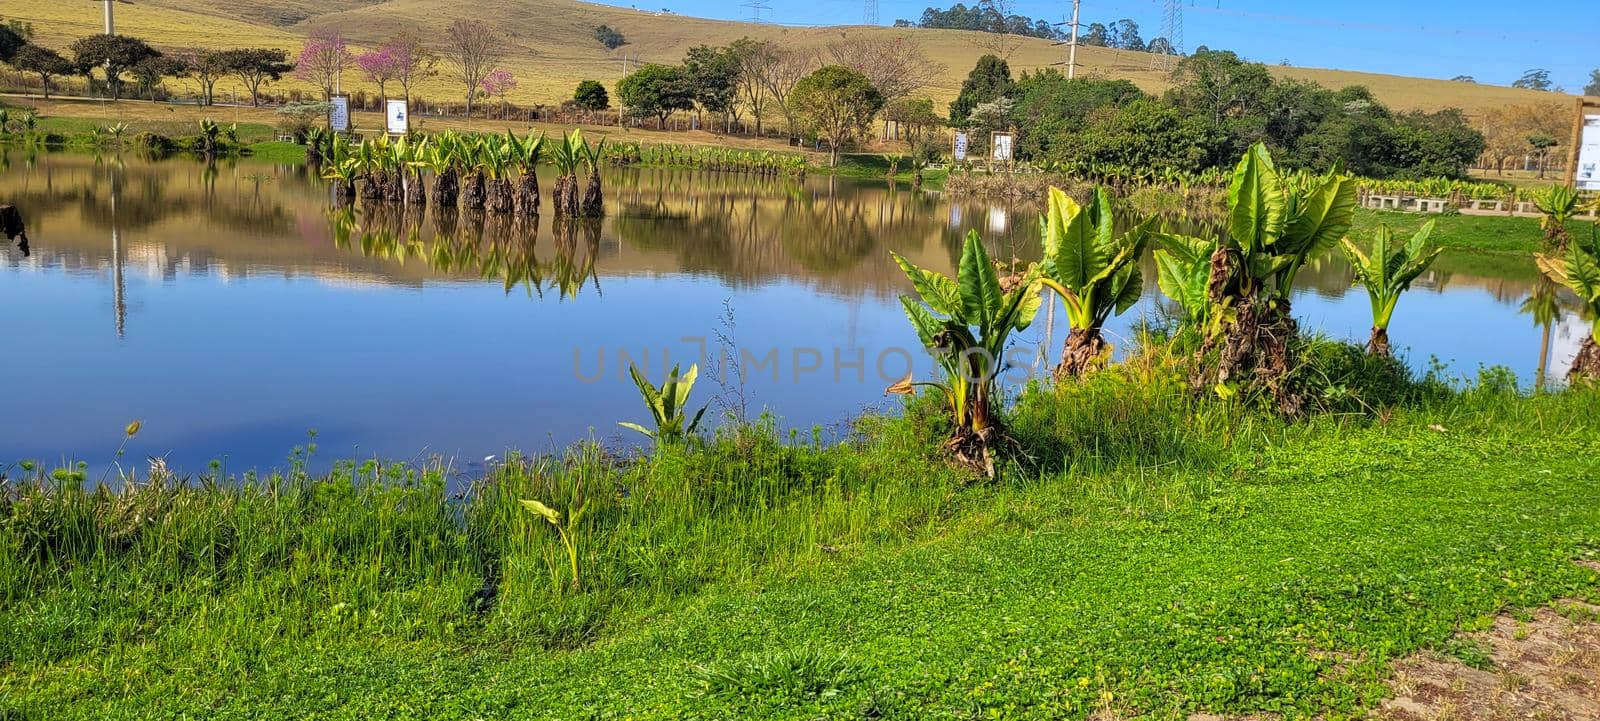 natural tropical lake in the interior of Brazil with grass vegetations and plants by sarsa